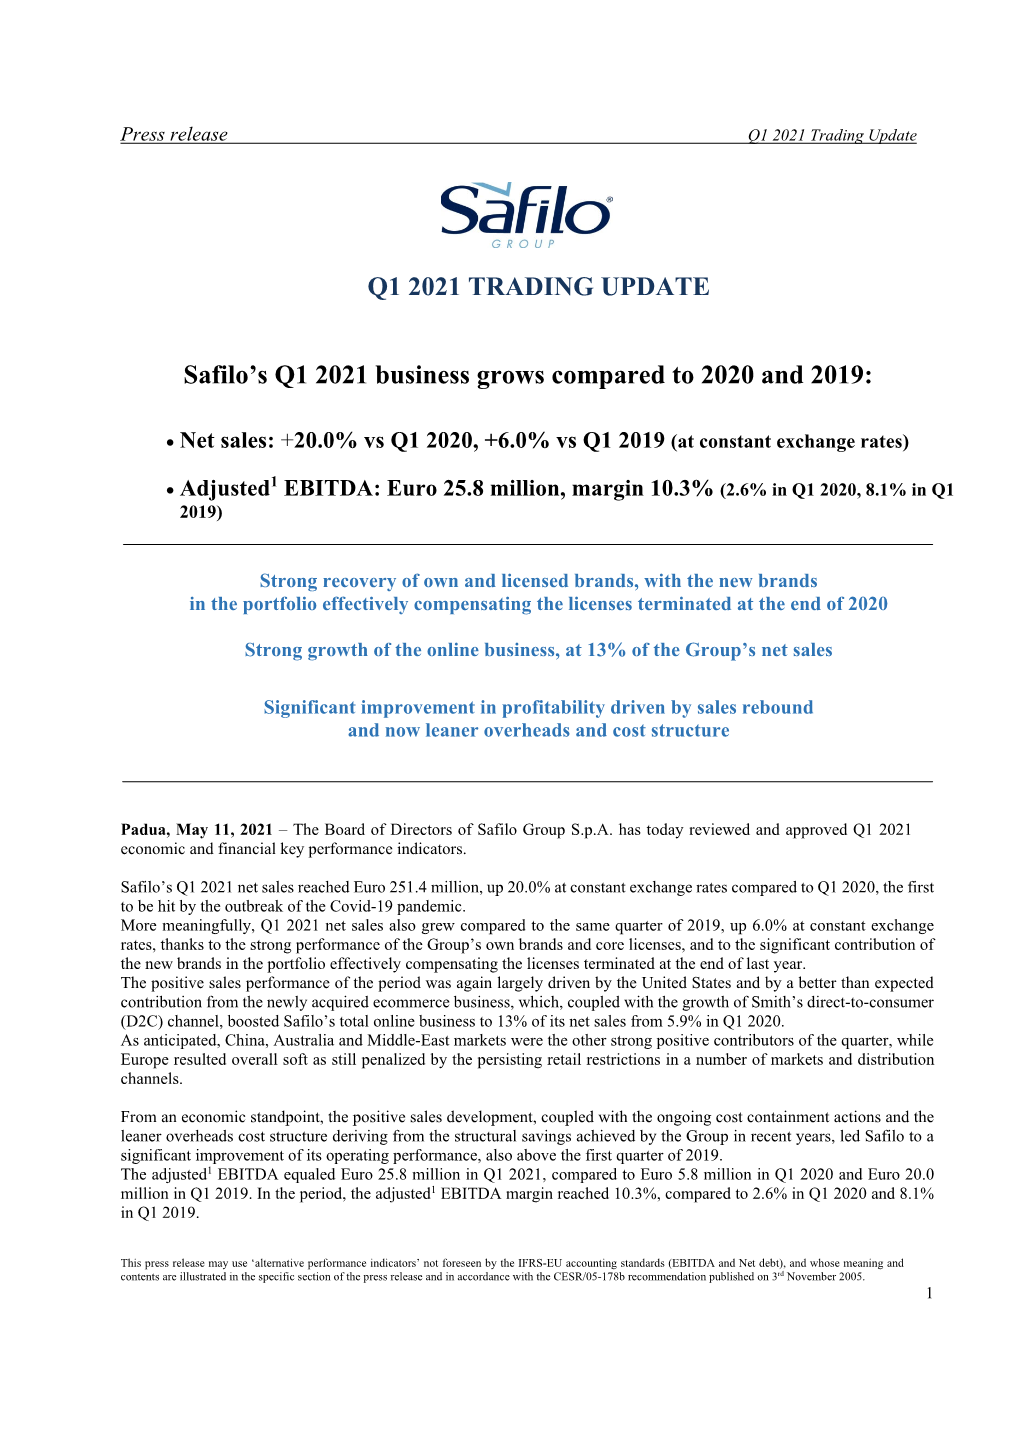 Q1 2021 TRADING UPDATE Safilo's Q1 2021 Business Grows Compared to 2020 and 2019